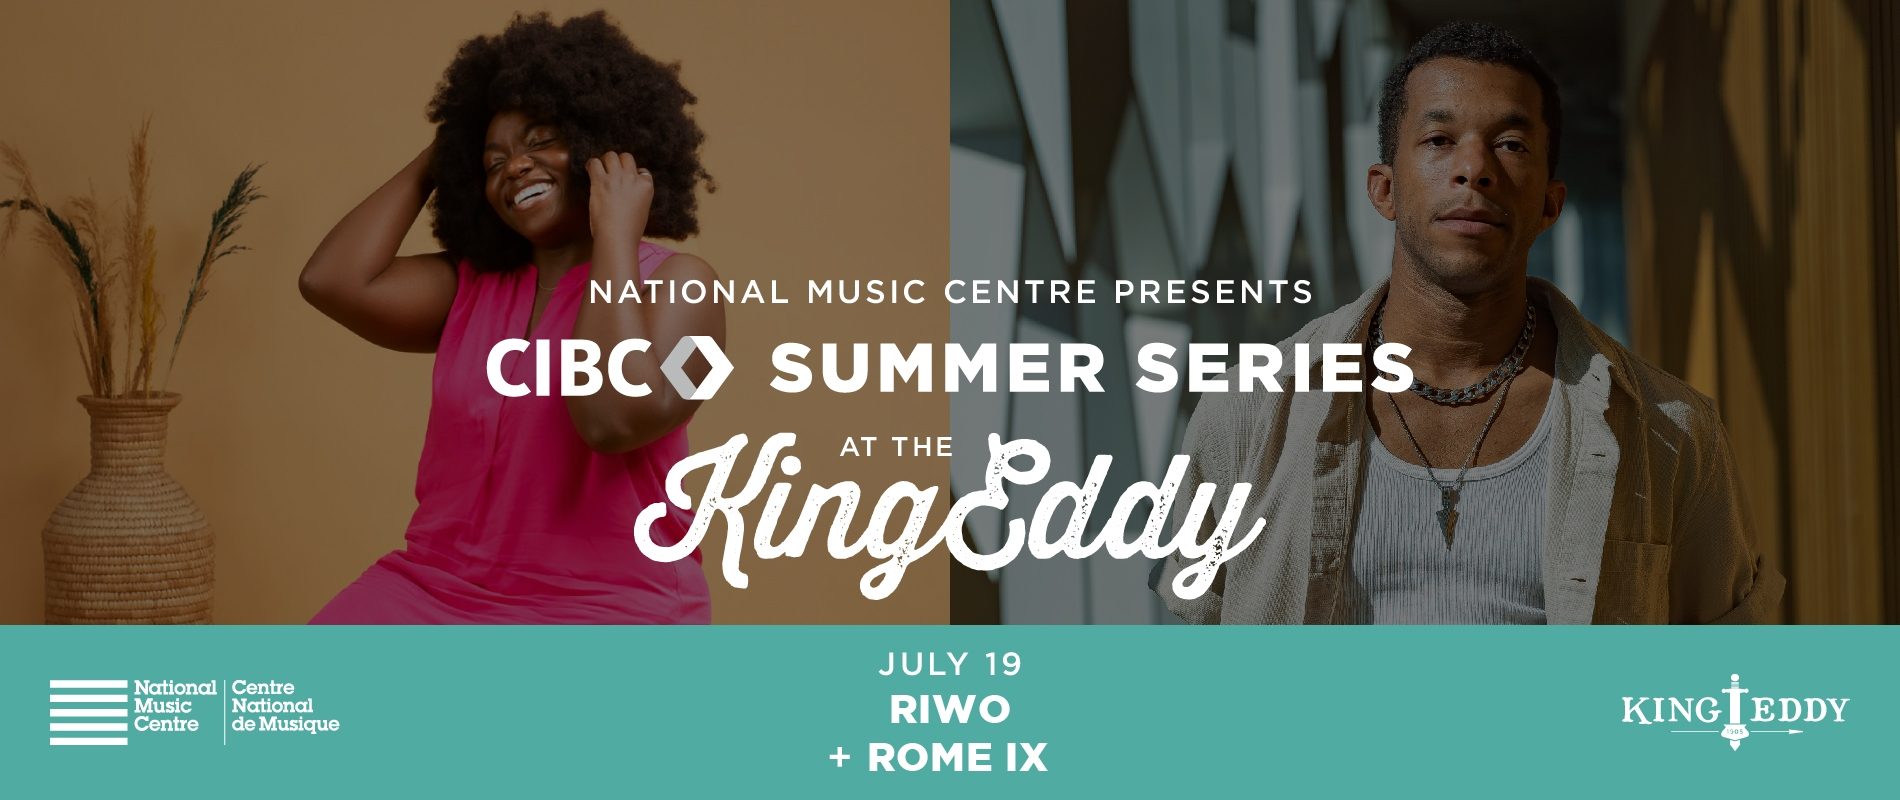 NMC Presents: CIBC Summer Series at the King Eddy — Riwo with Rome IX